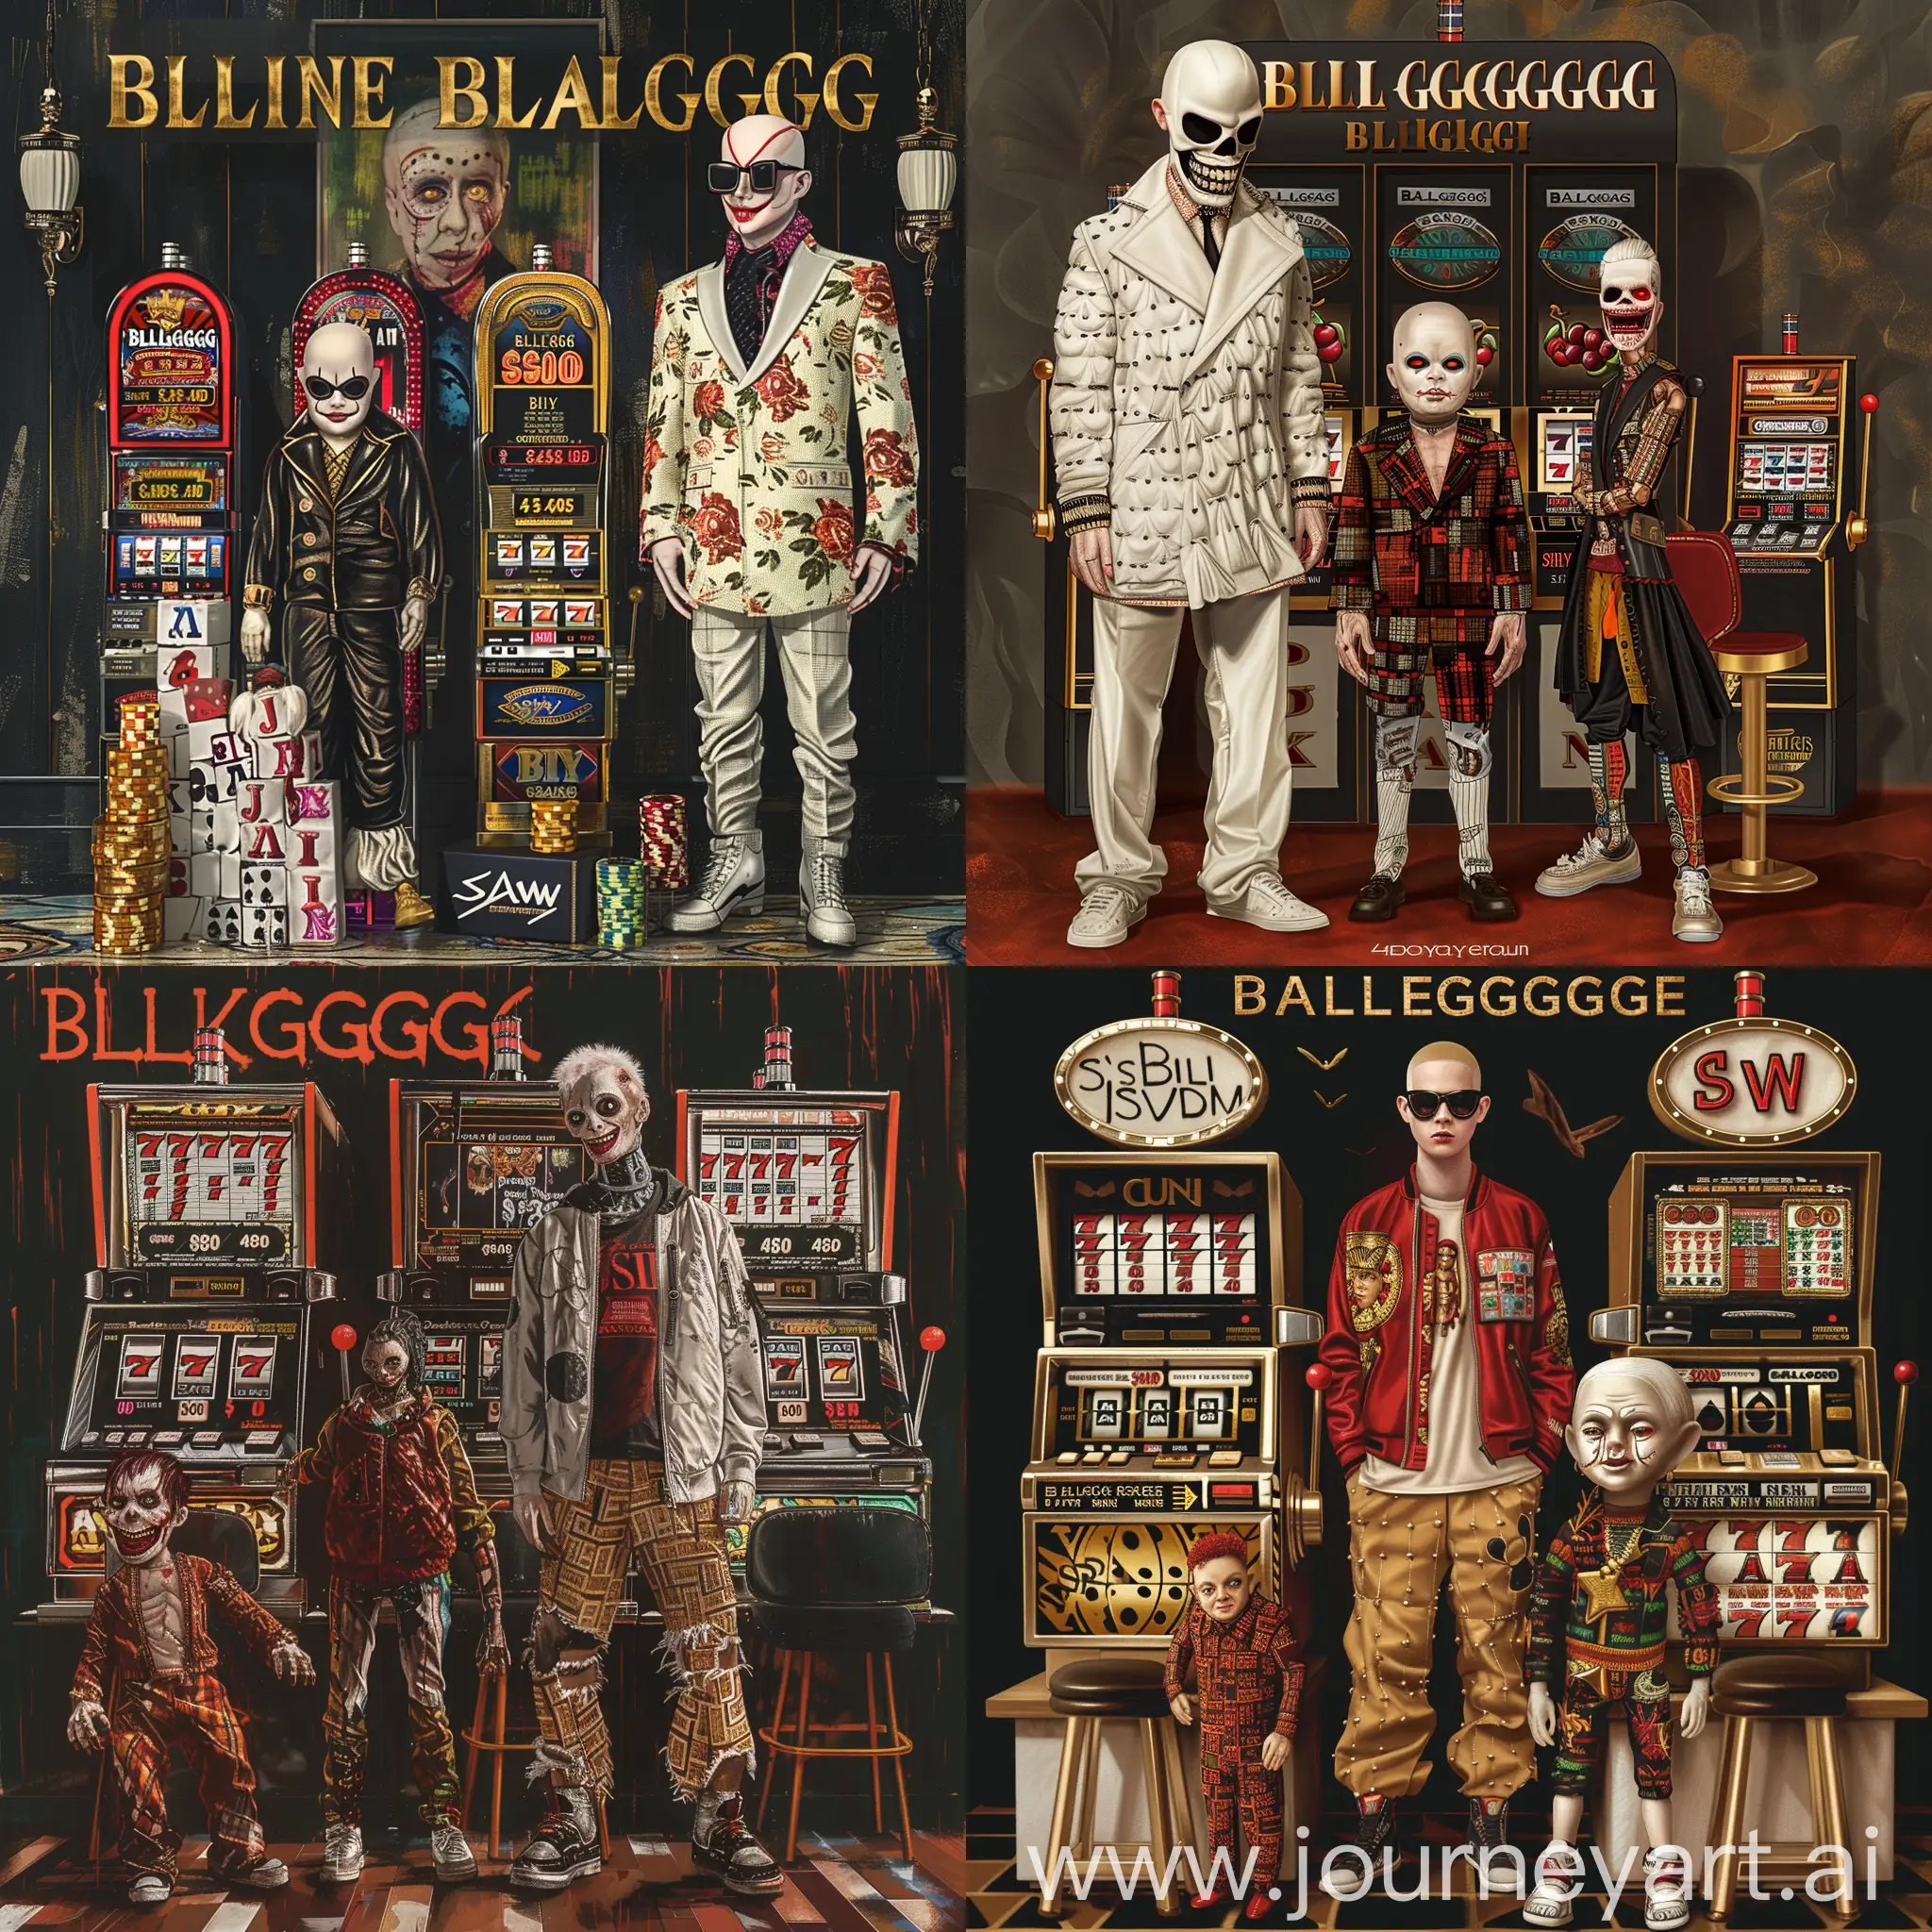 draw an image of the album cover, where there will be a white man dressed in the balenciaga brand, next to him will be a Billy doll from the movie "Saw", and behind him slot machines from the casino. 4k super hd, realistic, cinematic.